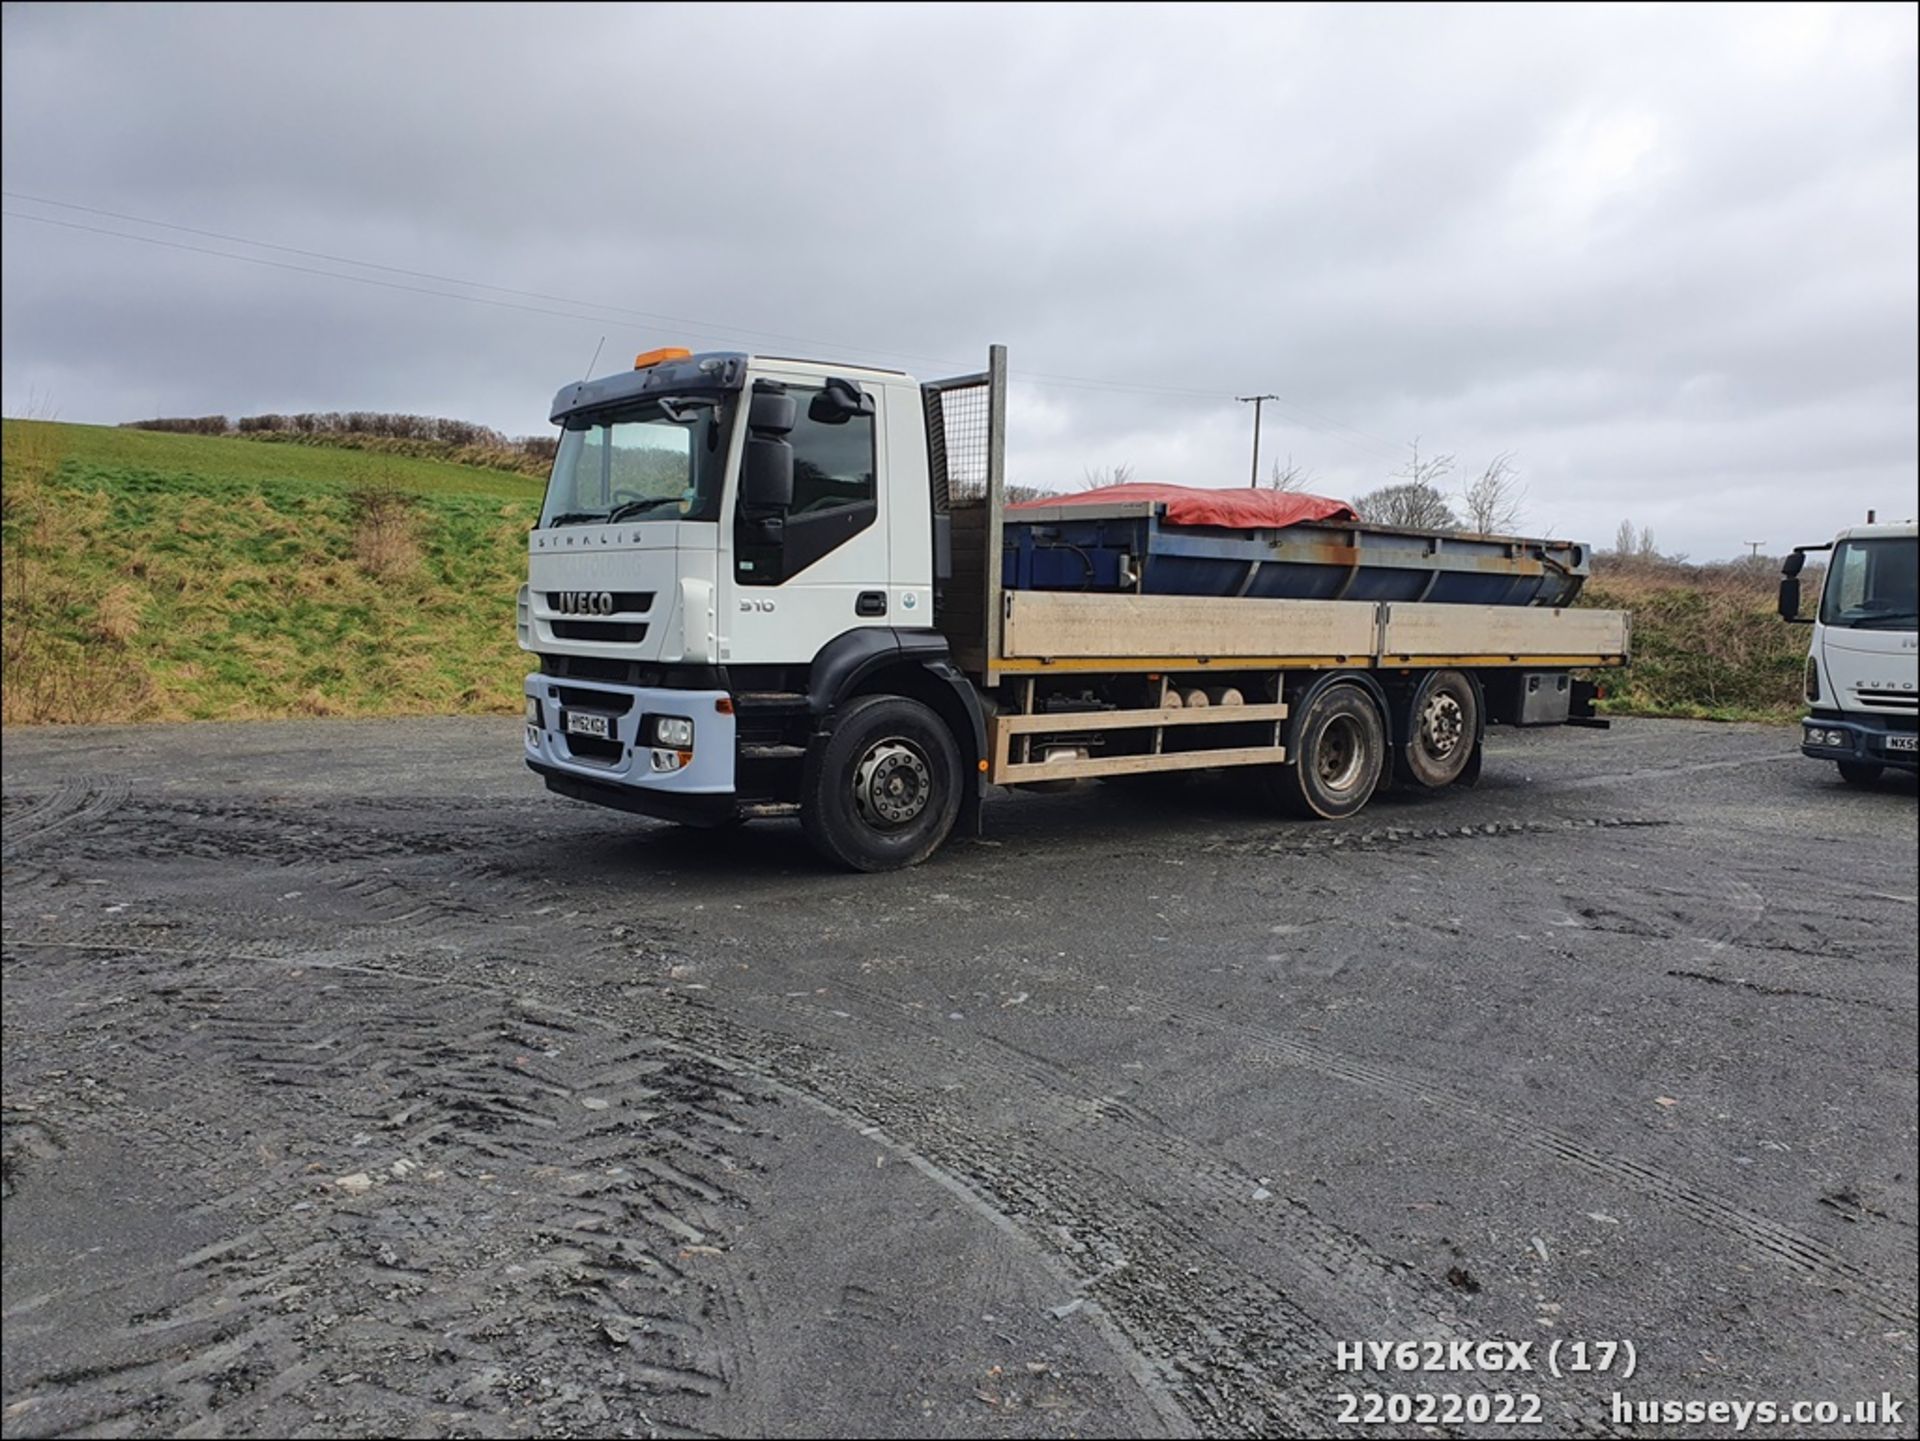 12/62 IVECO STRALIS - 7790cc 2dr Flat Bed (White) - Image 19 of 28